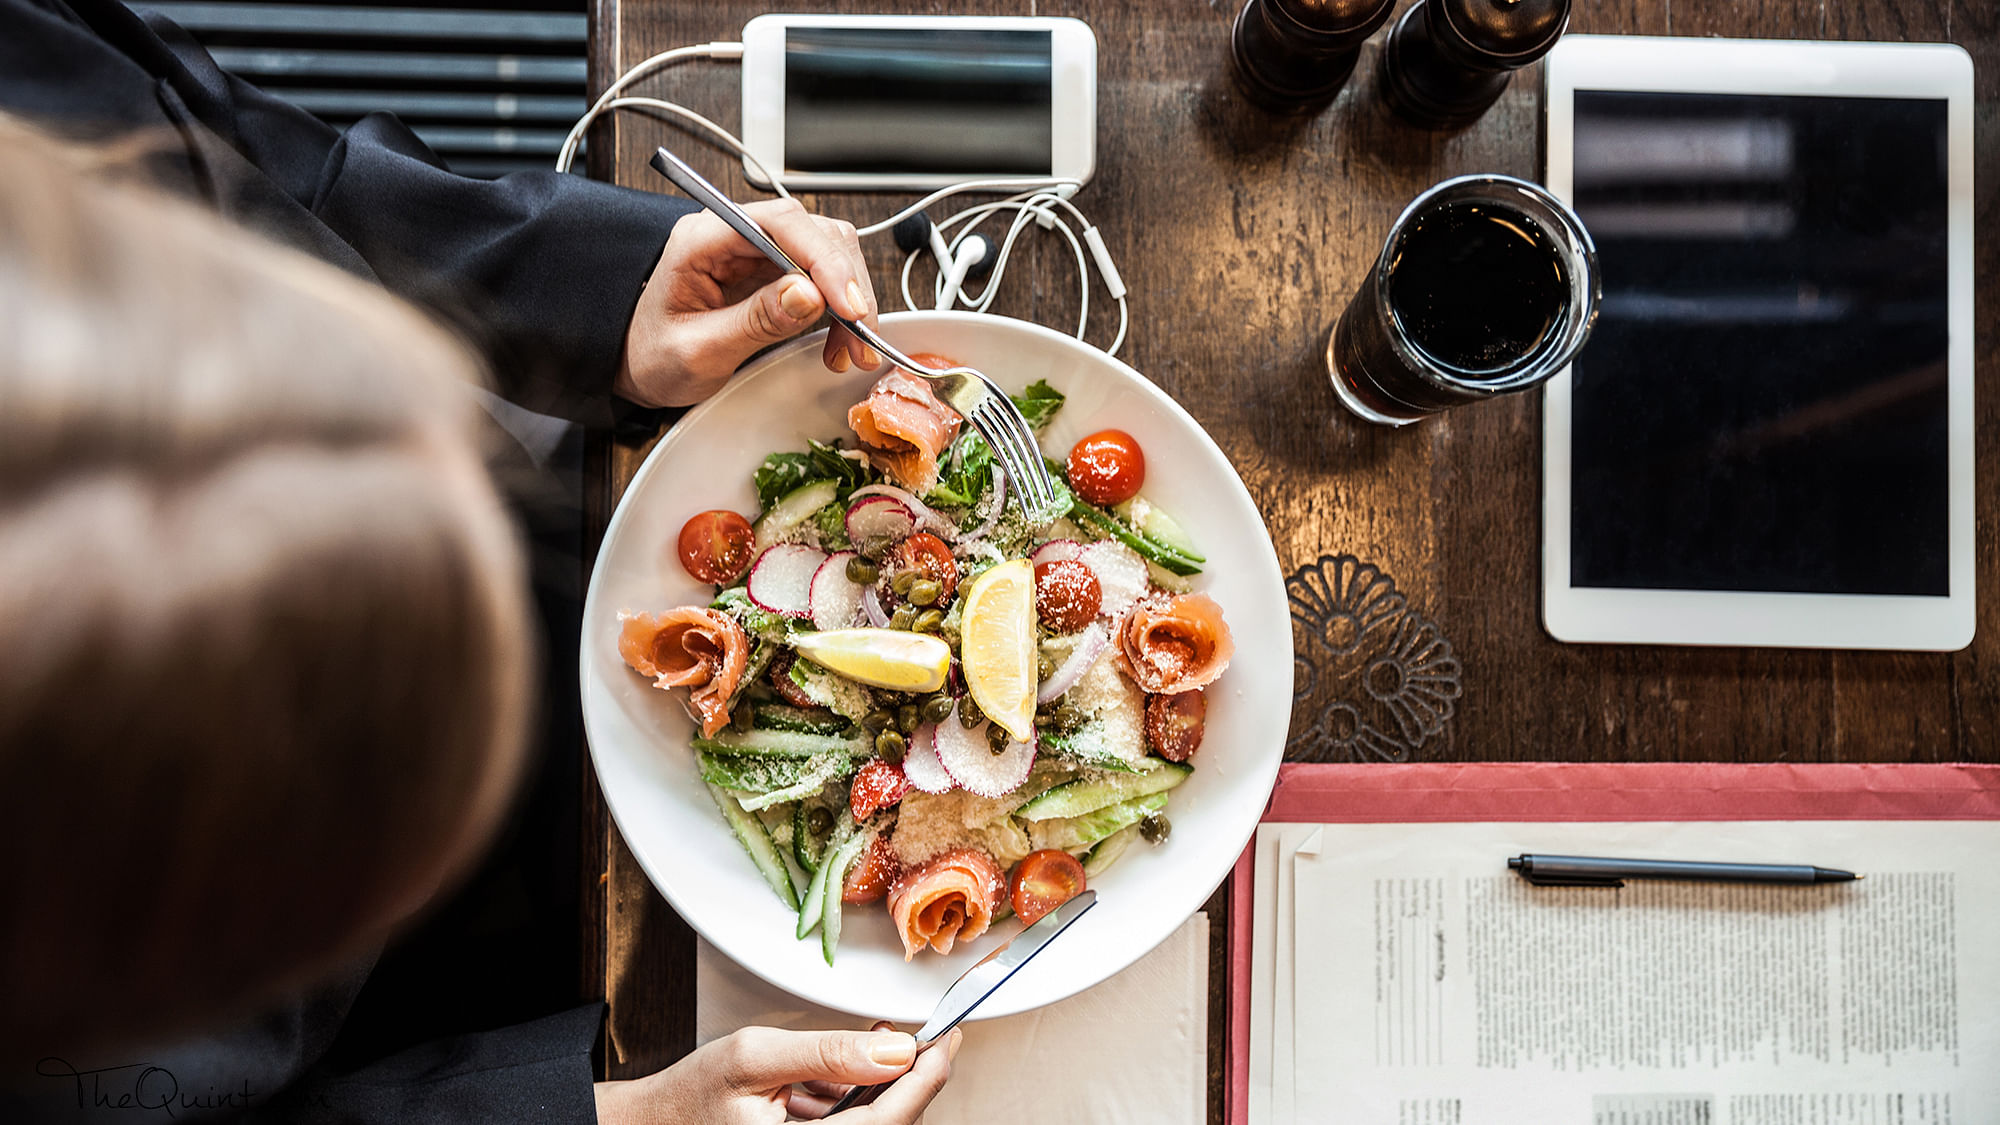 The findings published in the journal Cell Metabolism suggest that a good meal can stimulate the release of the feel-good hormone dopamine twice.